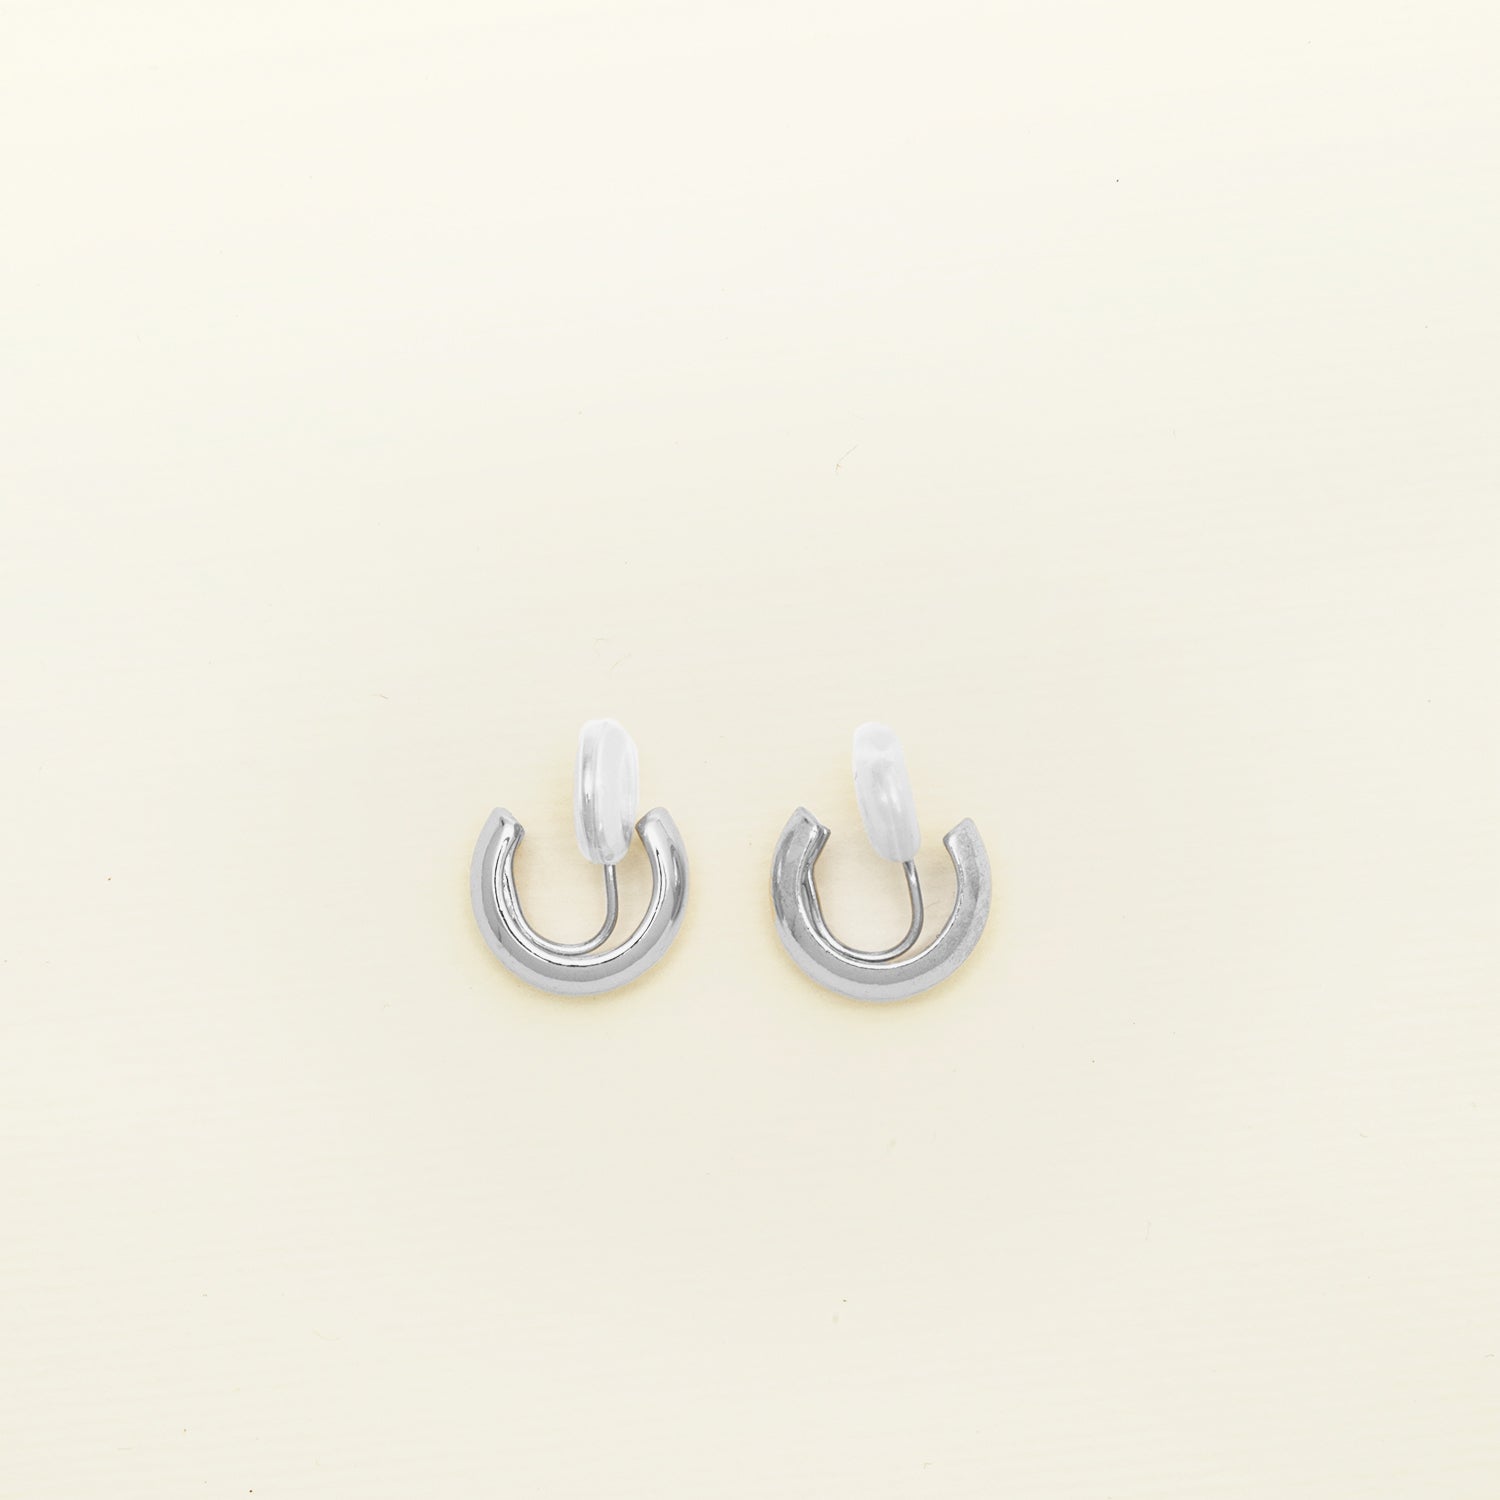 Image of the Simple Silver Huggie Clip-On Earrings provide a medium secure hold, making them perfect for all ear types. With adjustable padding for extra comfort, these earrings can be worn for up to 24 hours with ease. 